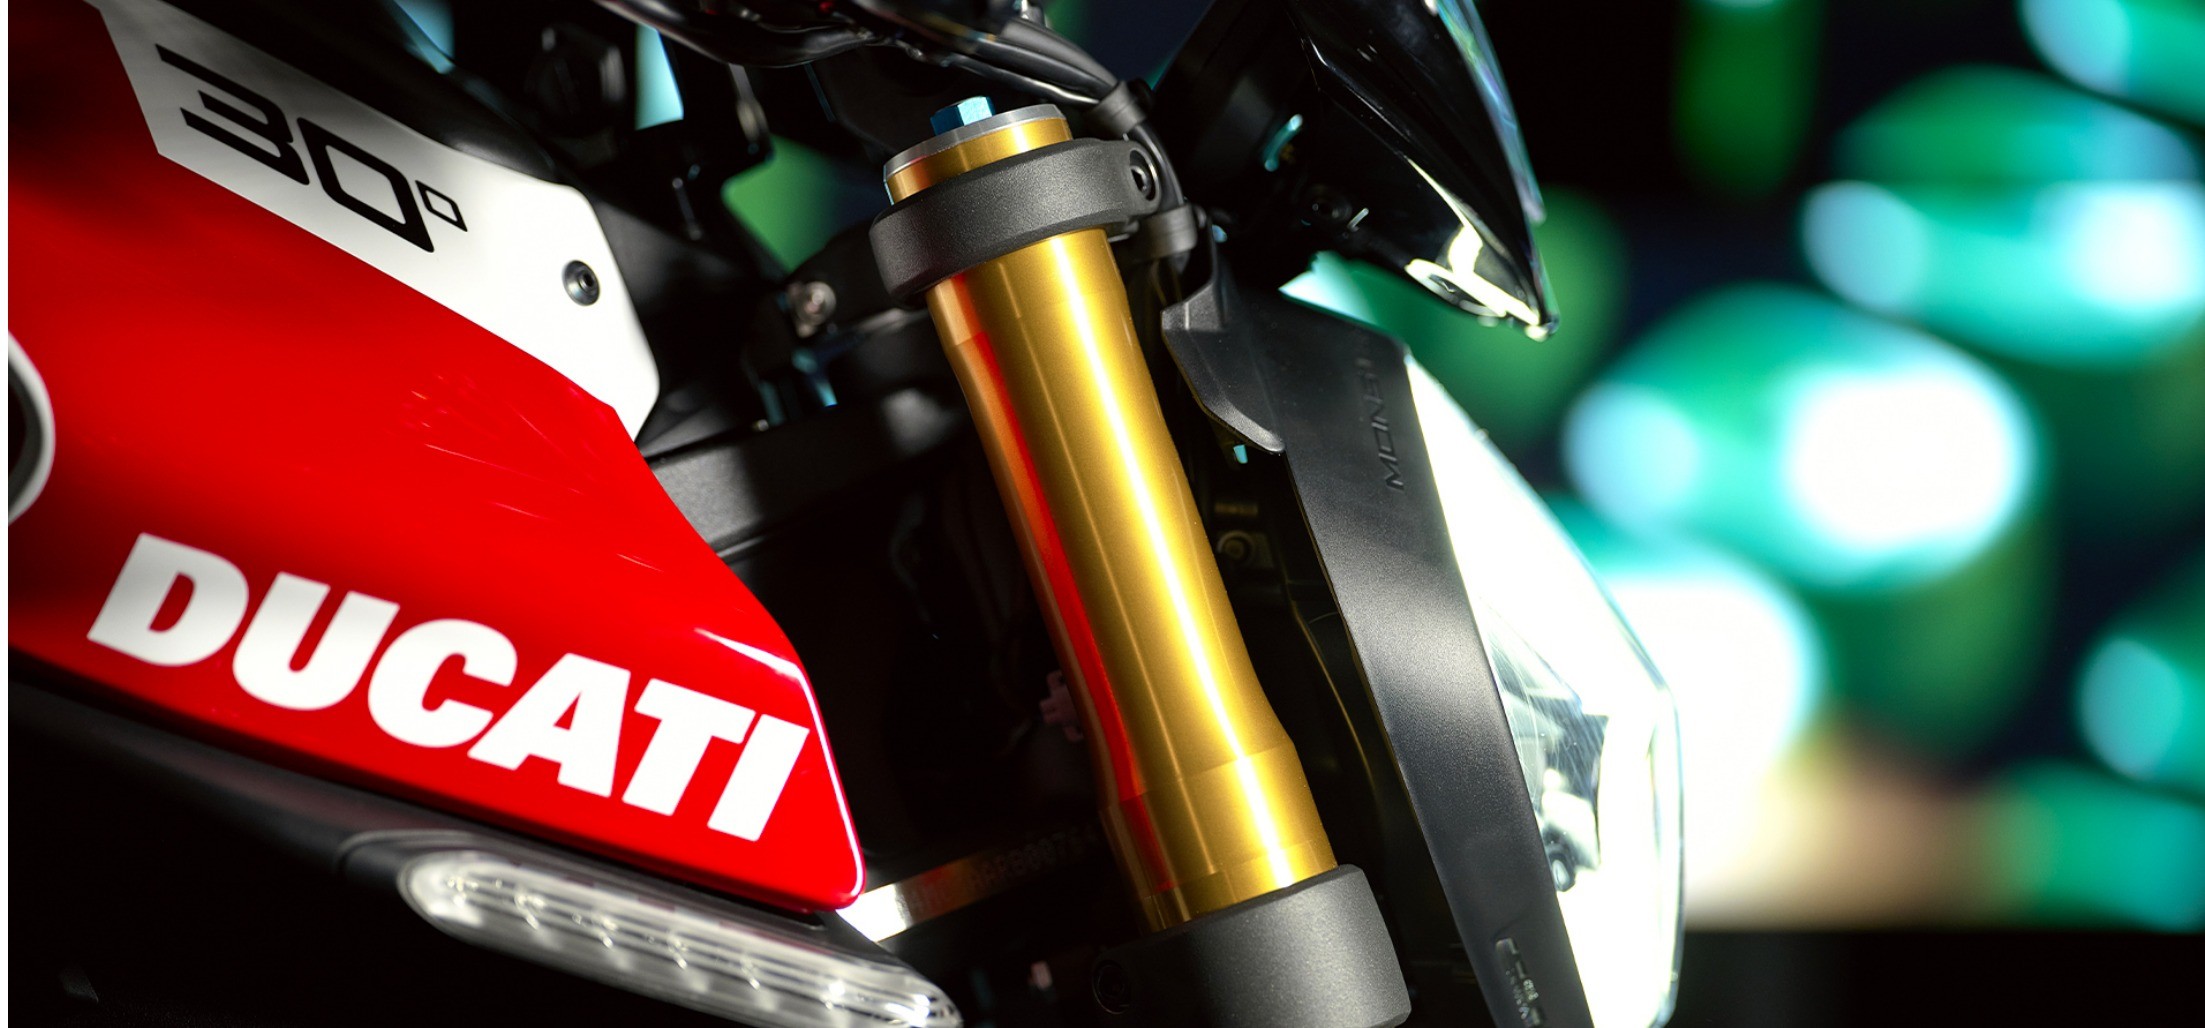 Monster 30° Anniversario: Ducati celebrates the motorcycle symbol of the naked world